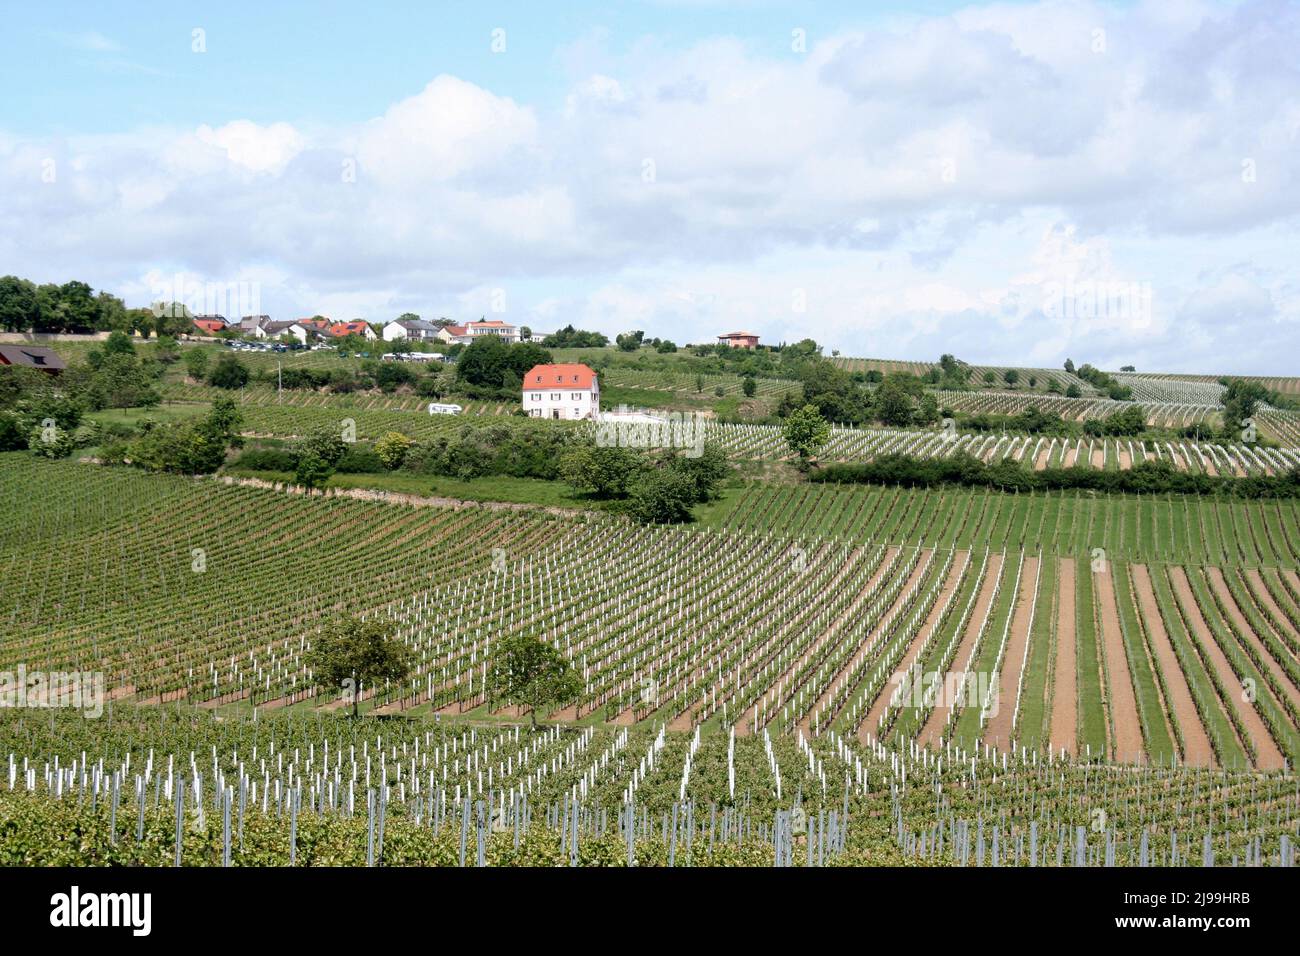 View of the brightly colored roofs of the old town of Herxheim am berg, Germany, from the surrounding vineyards. Stock Photo